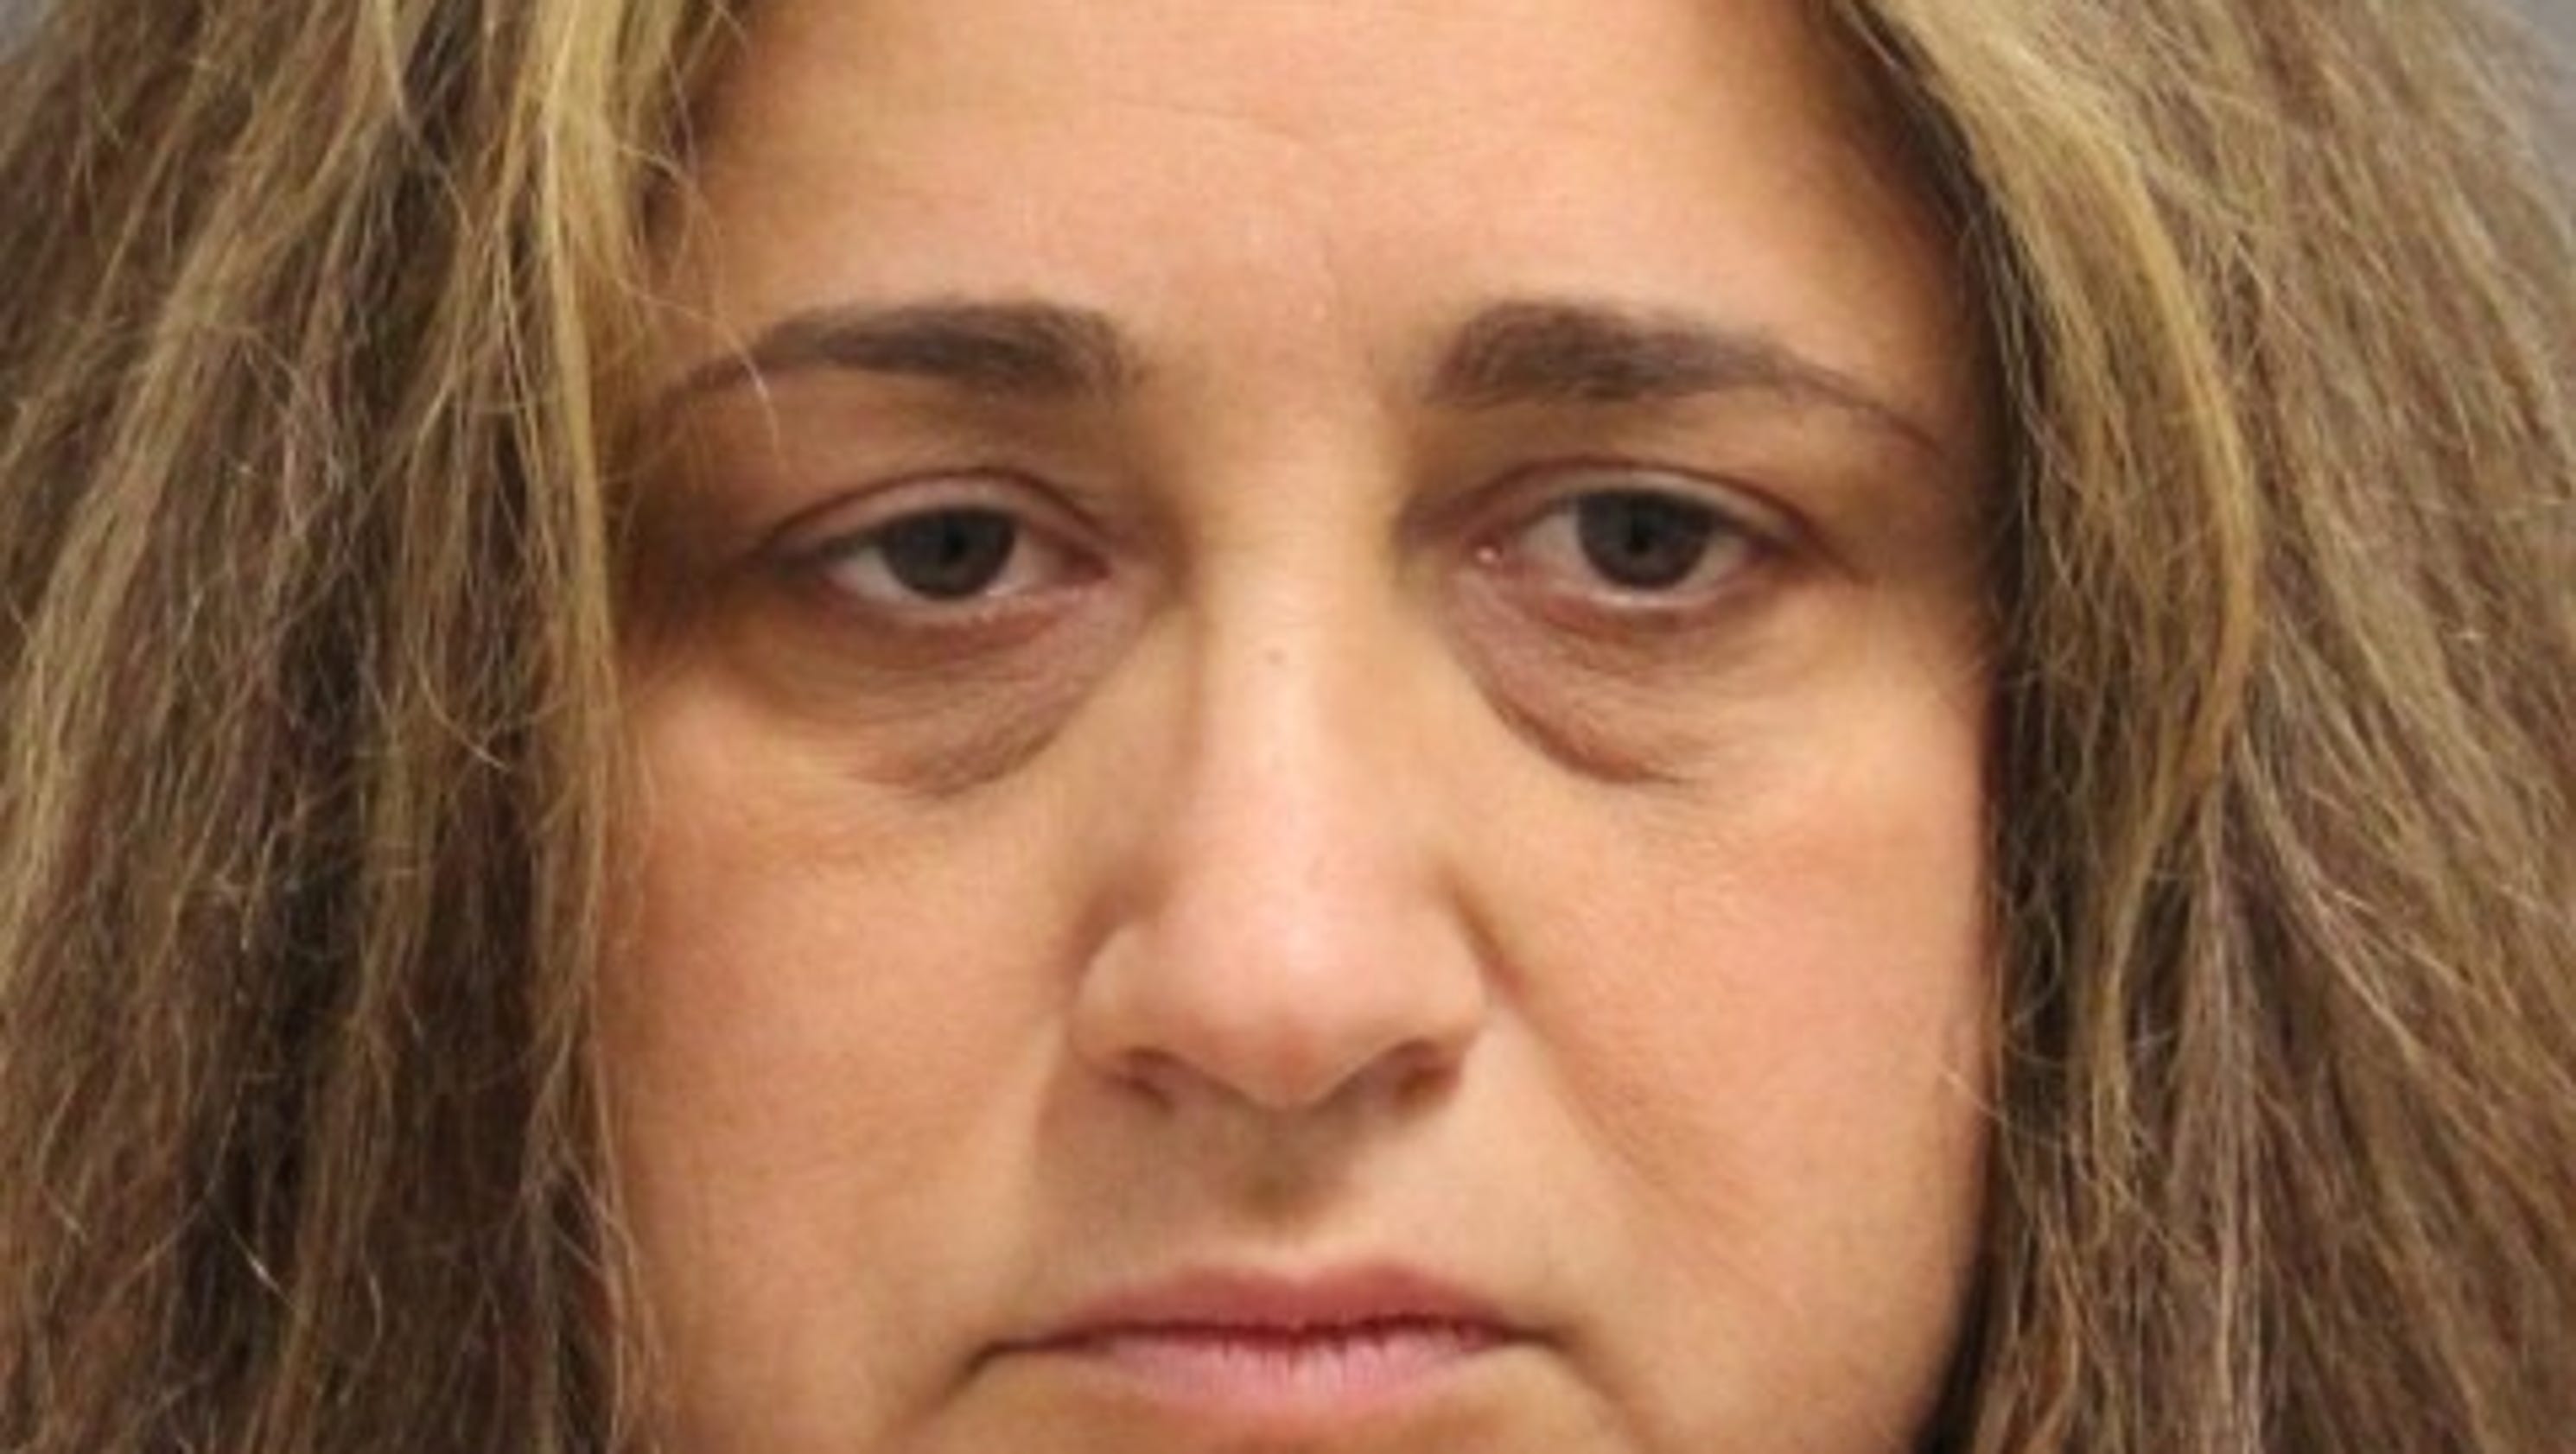 $150,000 embezzled from Beebe Healthcare by employee: Police